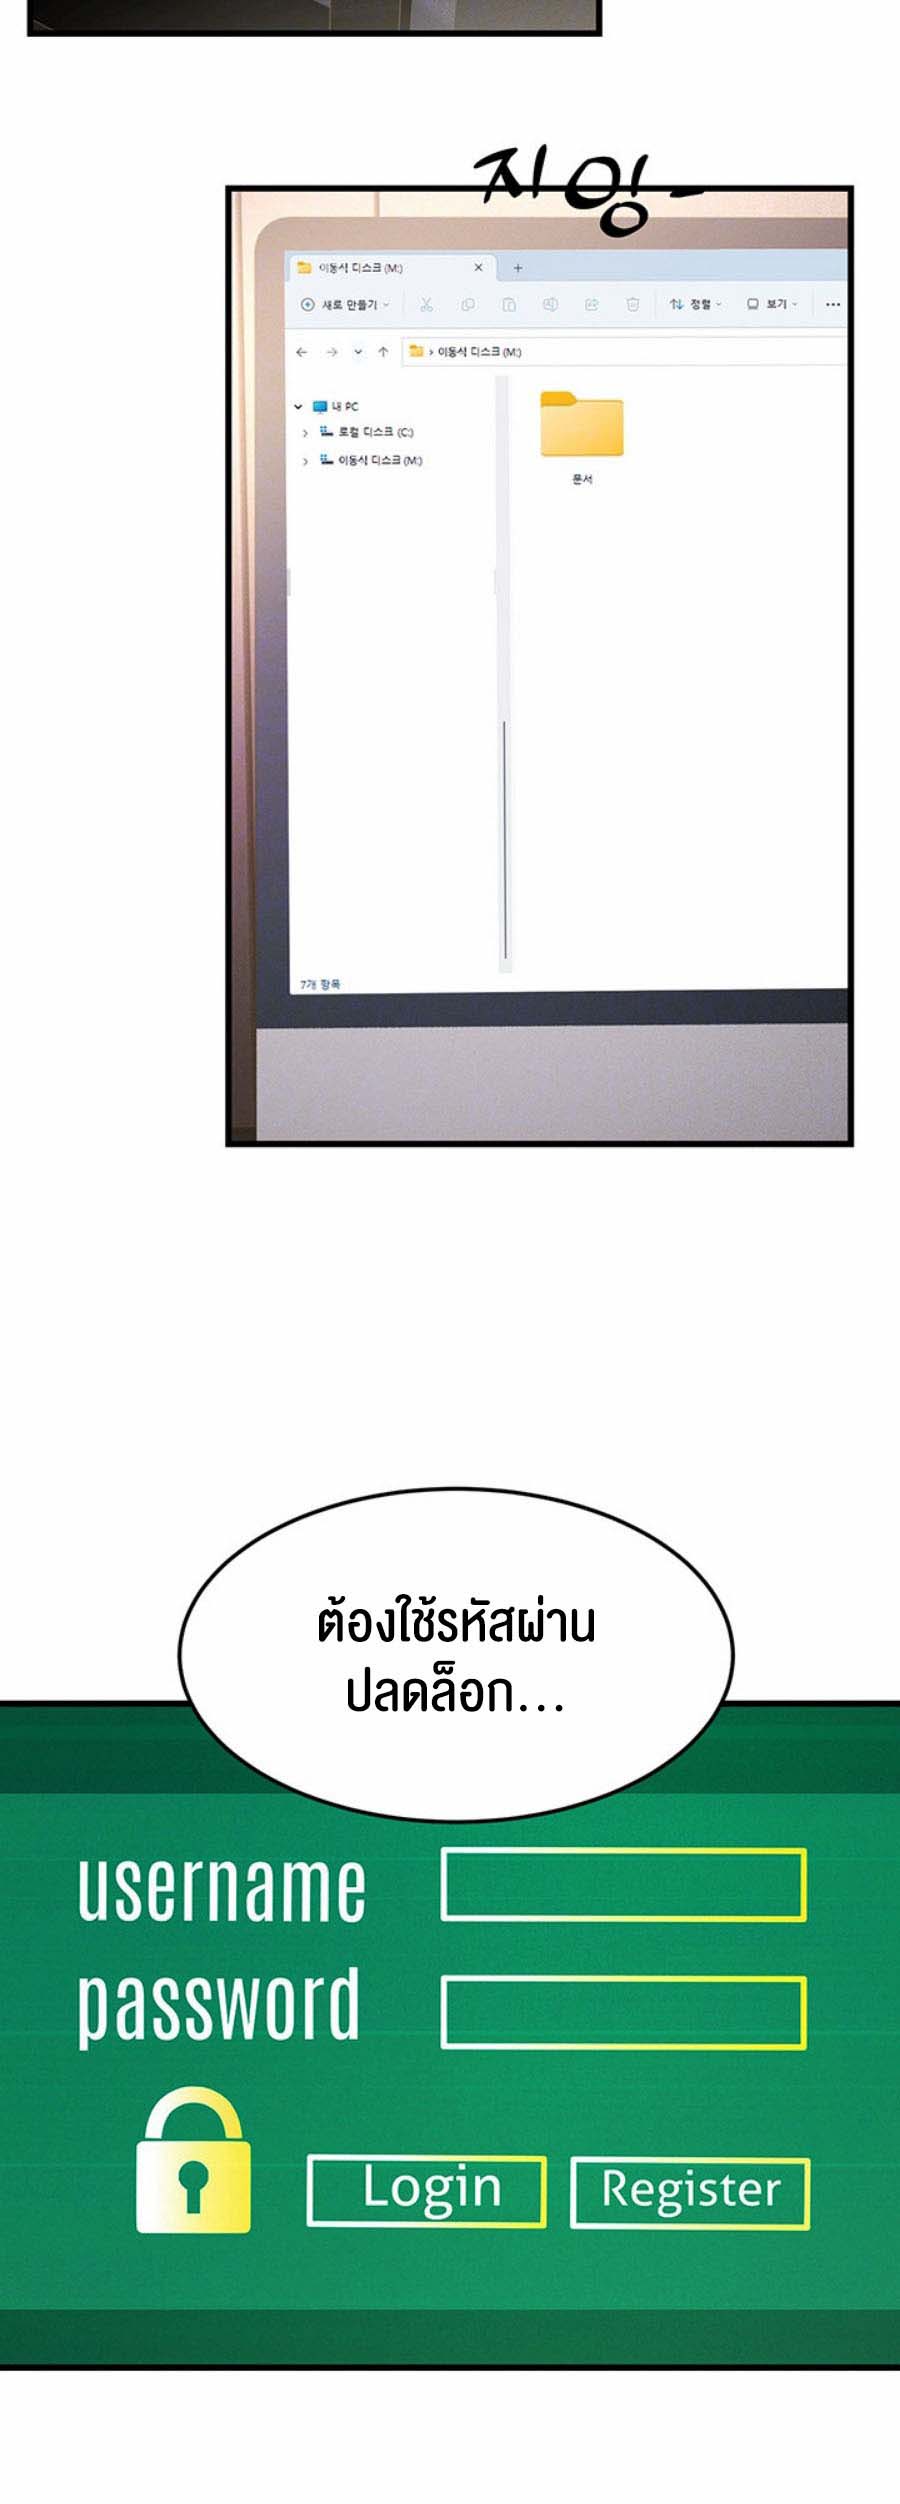 à¸­à¹ˆà¸²à¸™à¹‚à¸”à¸ˆà¸´à¸™ à¹€à¸£à¸·à¹ˆà¸­à¸‡ Mother in Law Bends To My Will 8 07